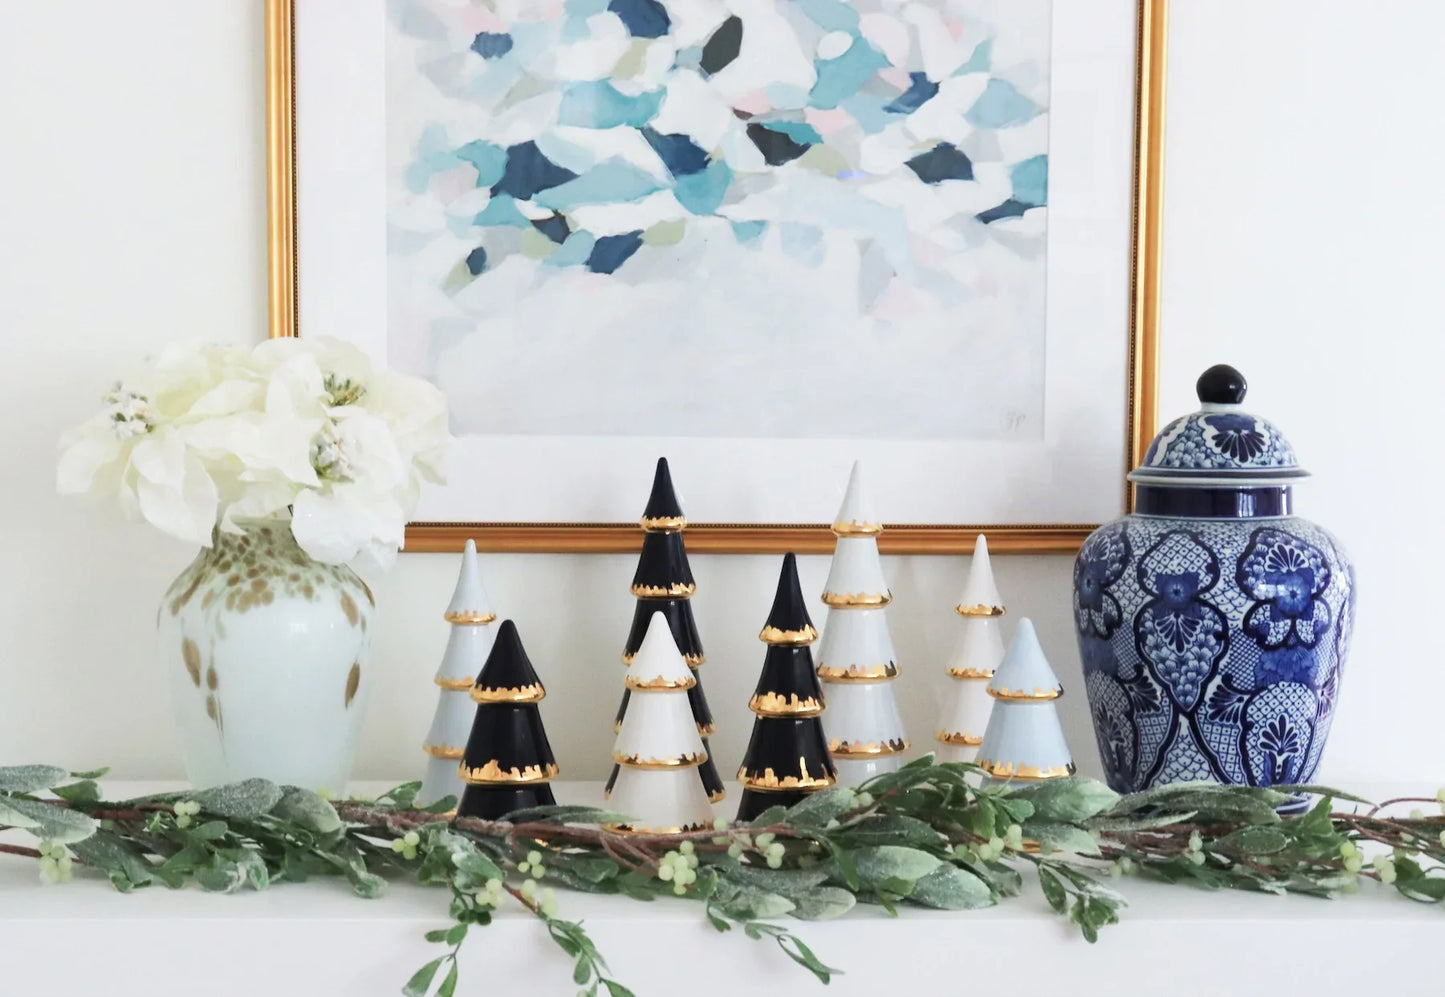 White Christmas Trees with 22K Gold Brushstroke Accent | Wholesale